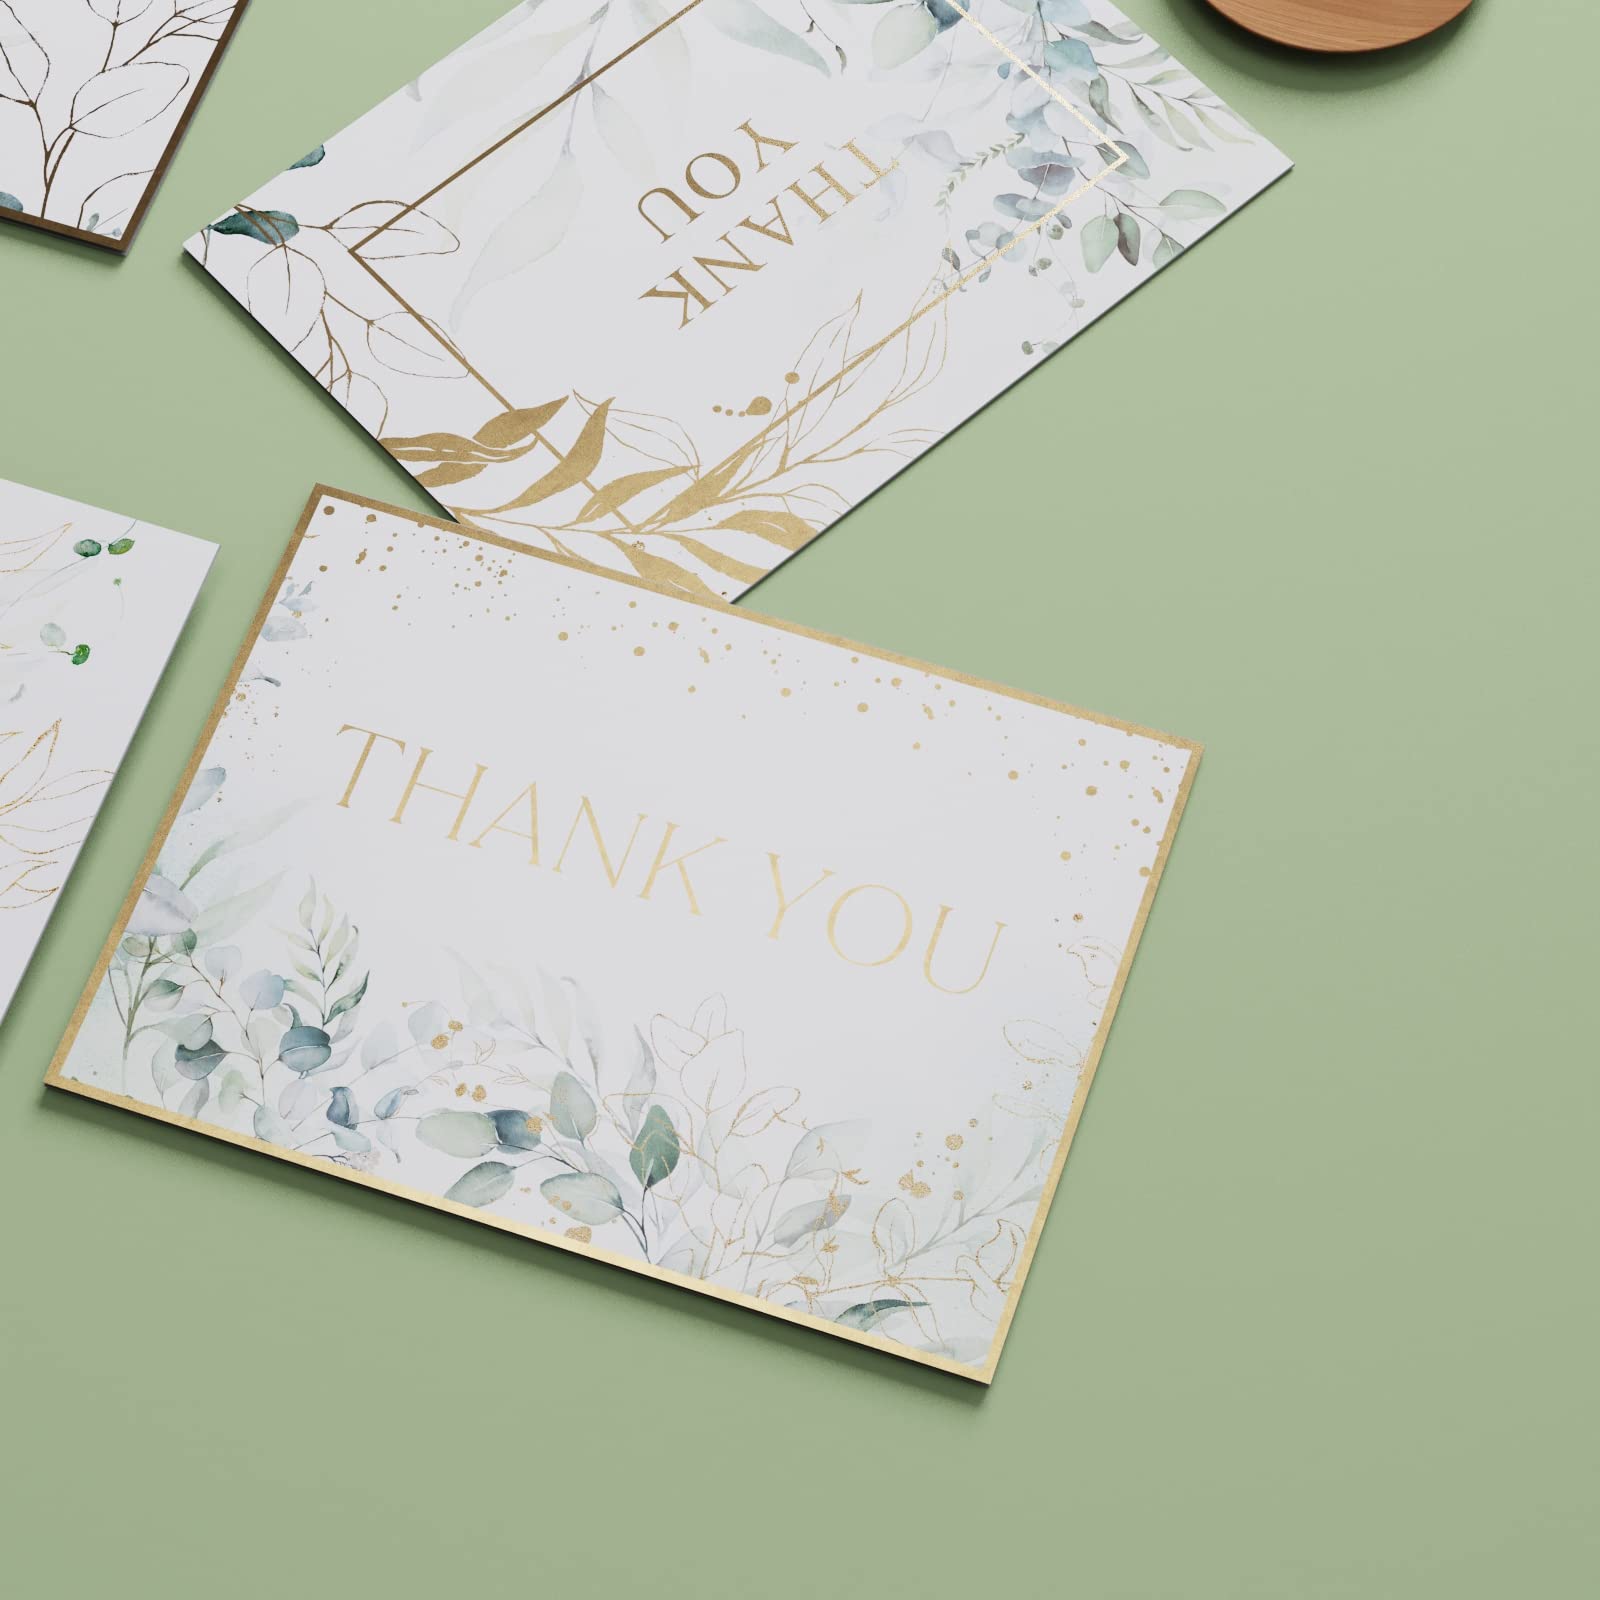 AMNADOF 100 Eucalyptus Gold Foil Thank You Cards with Greenery Envelopes - 5 Design Note Cards 3.75x 5 Inches – Include Stickers, Perfect for Wedding,Baby Shower, Bridal Shower